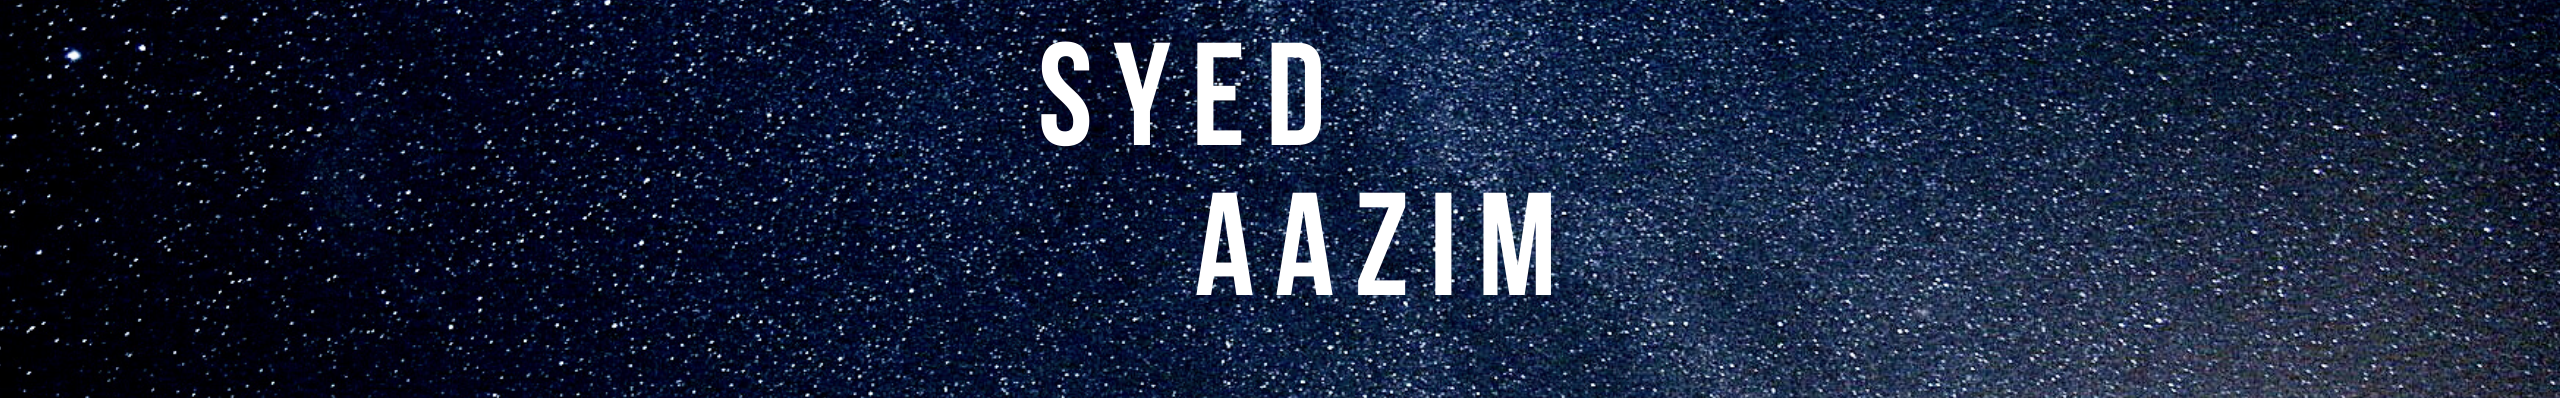 syed aazims profilbanner